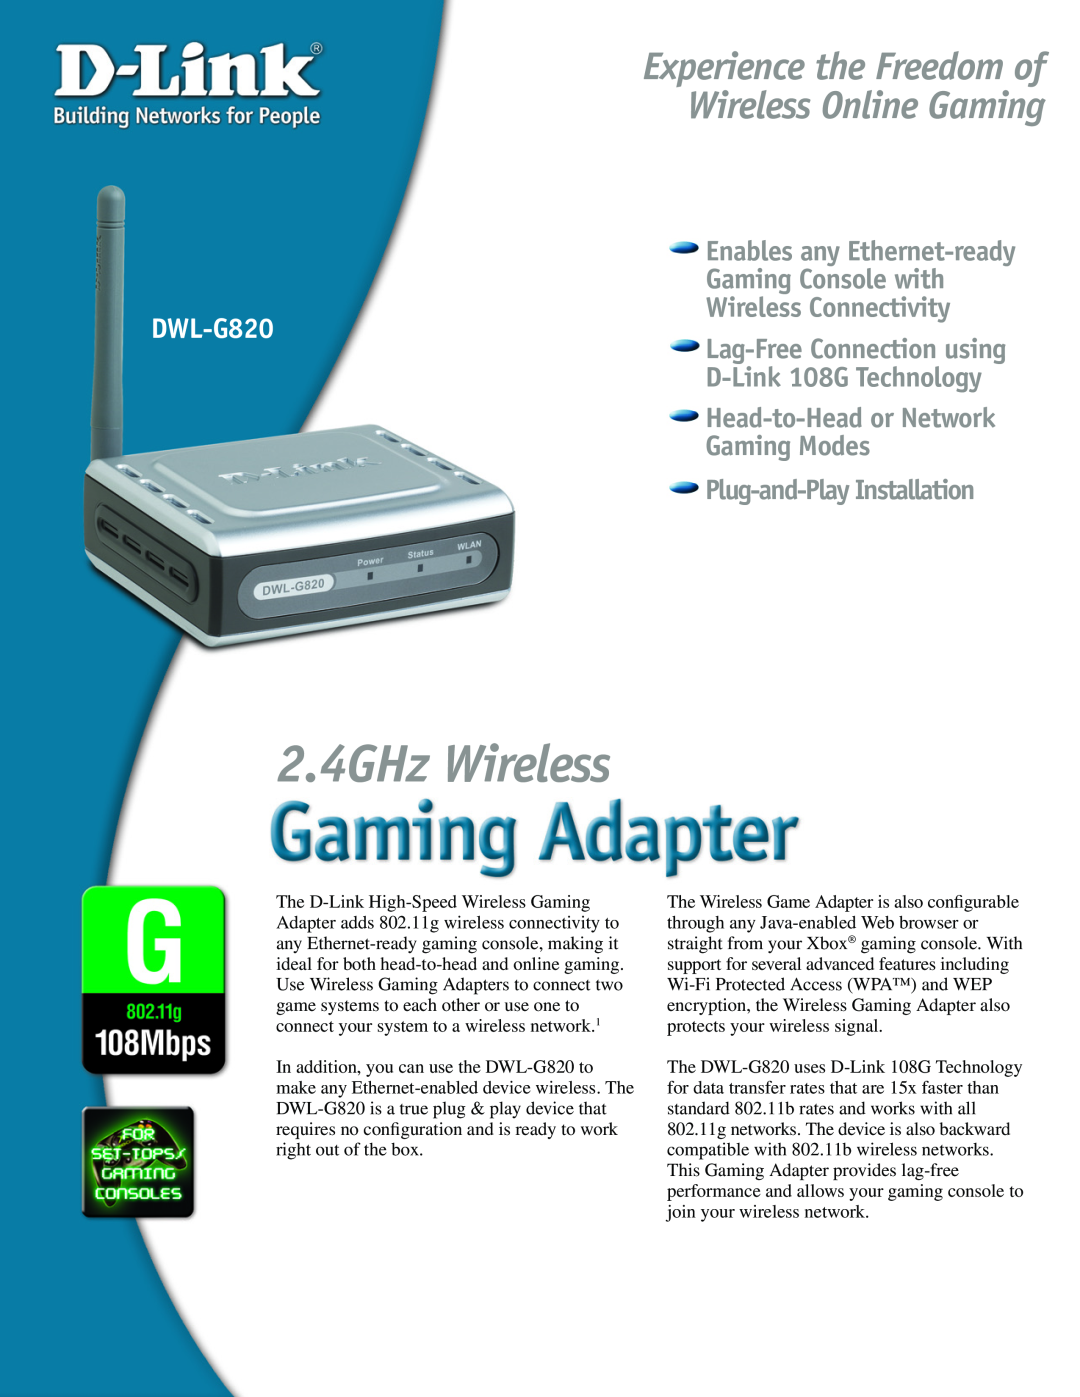 D-Link DWL-G820 manual 2.4GHz Wireless, Experience the Freedom of Wireless Online Gaming, Plug-and-Play Installation 